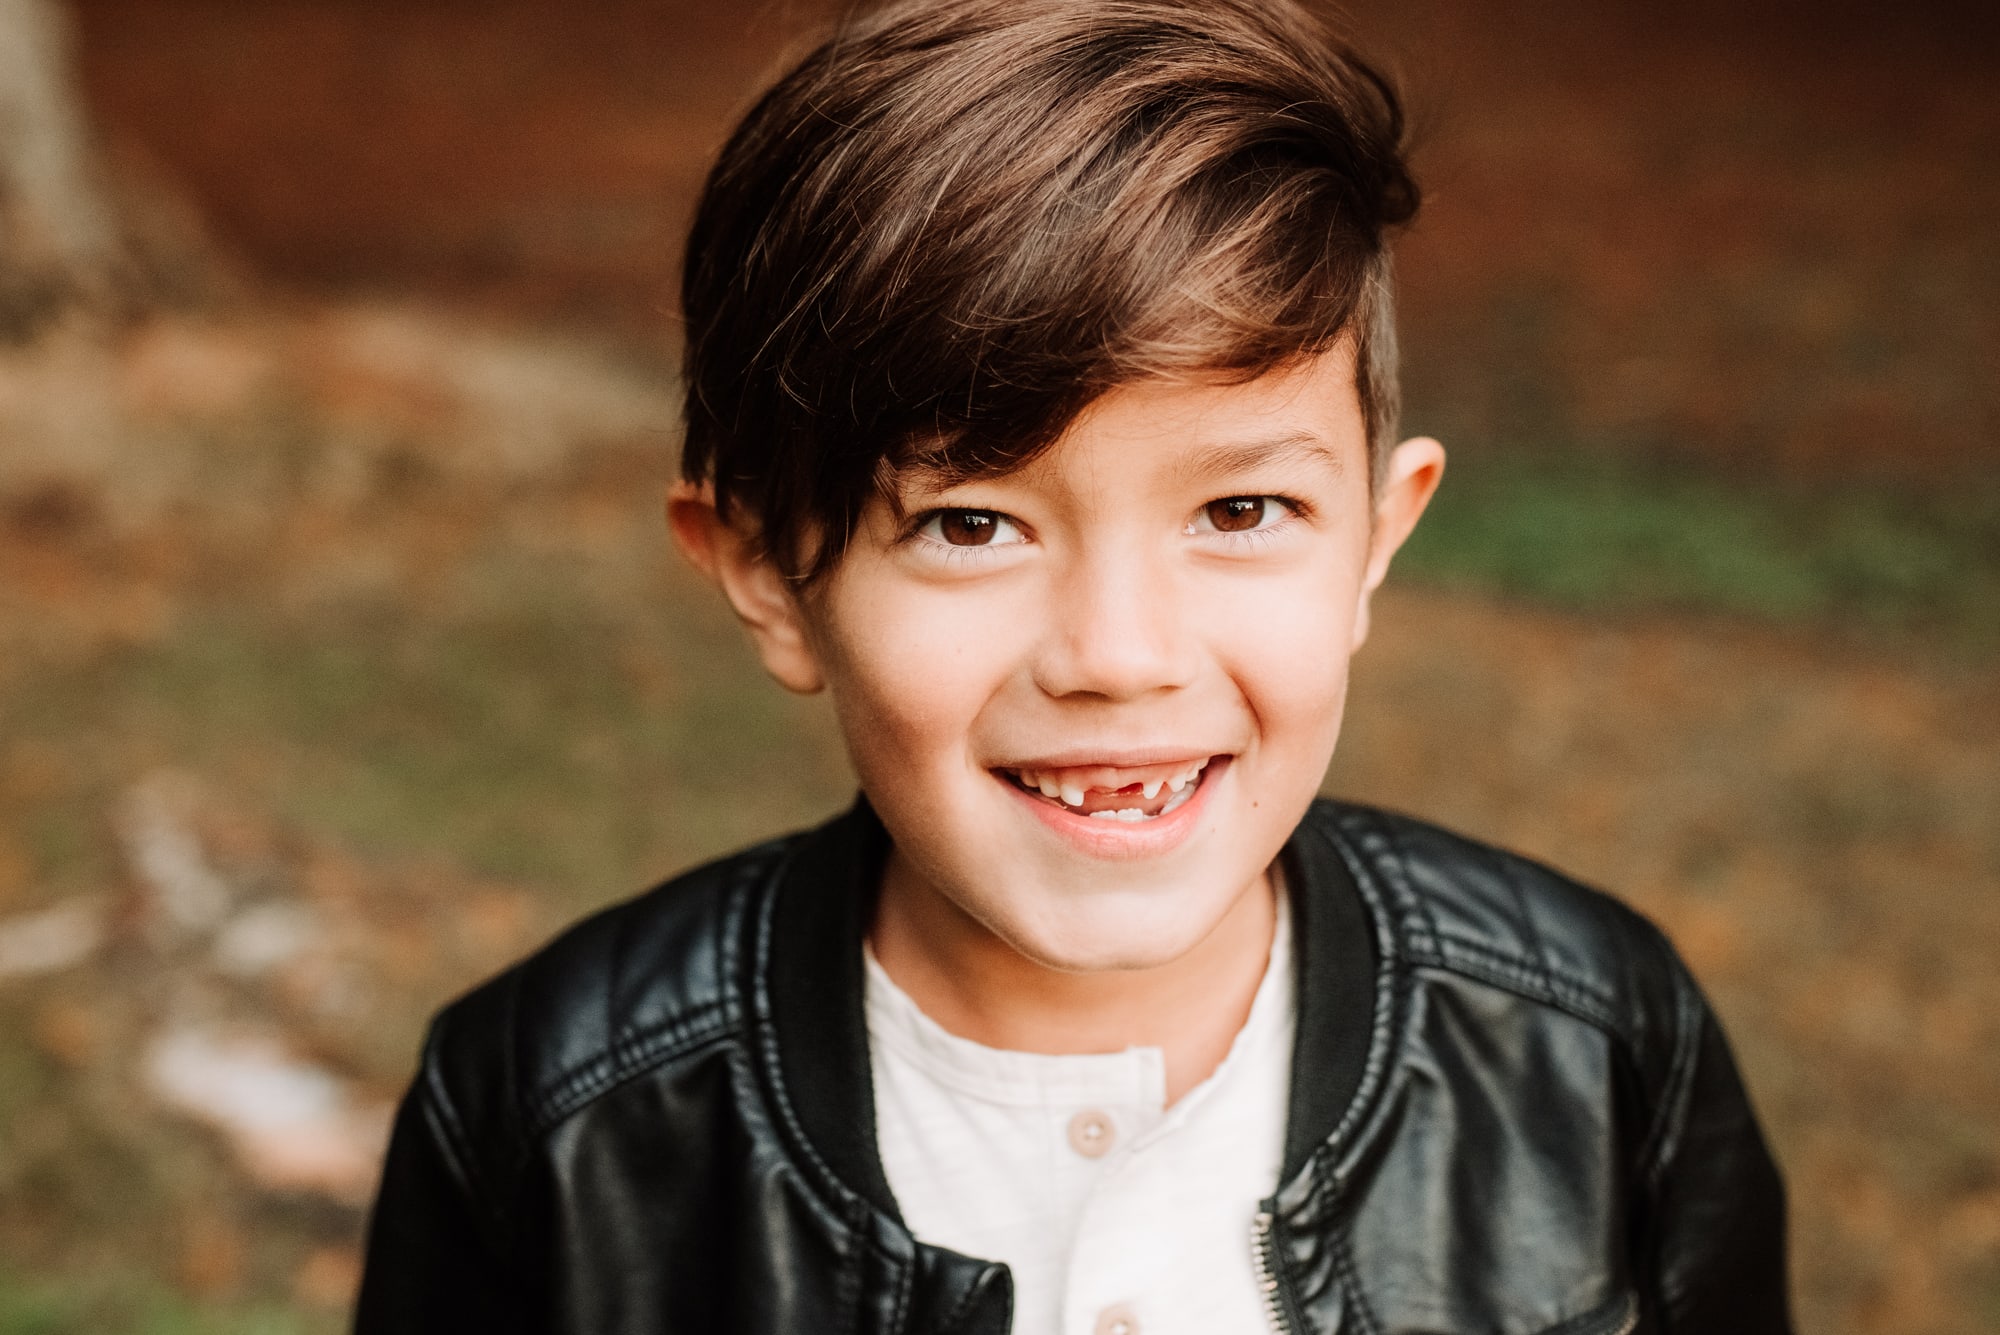 Boy with missing front teeth in Vancouver family session